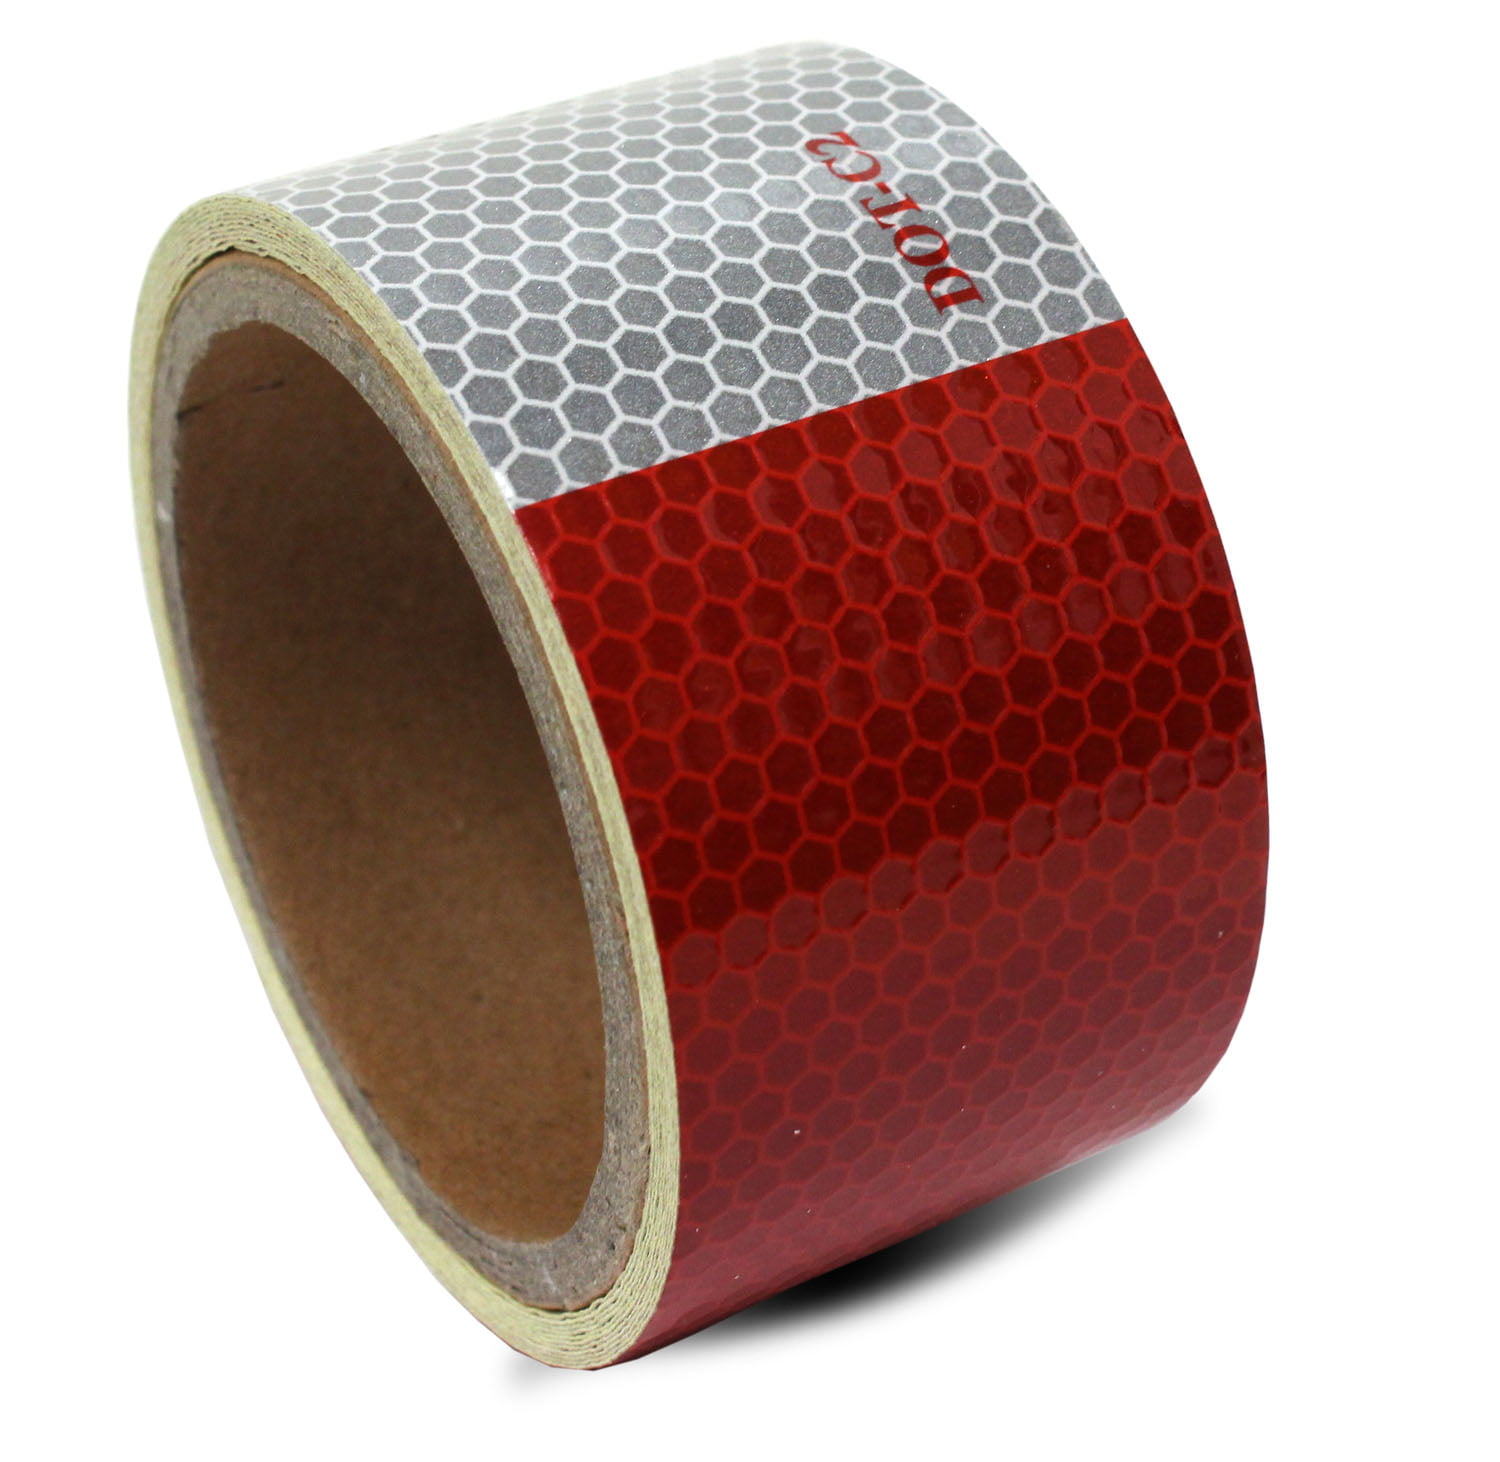 EZAUTOWRAP DOT-C2 Conspicuity Reflective Tape Red White 1 Foot Safety Warning Trailer RV 10 Strips 10 Feet